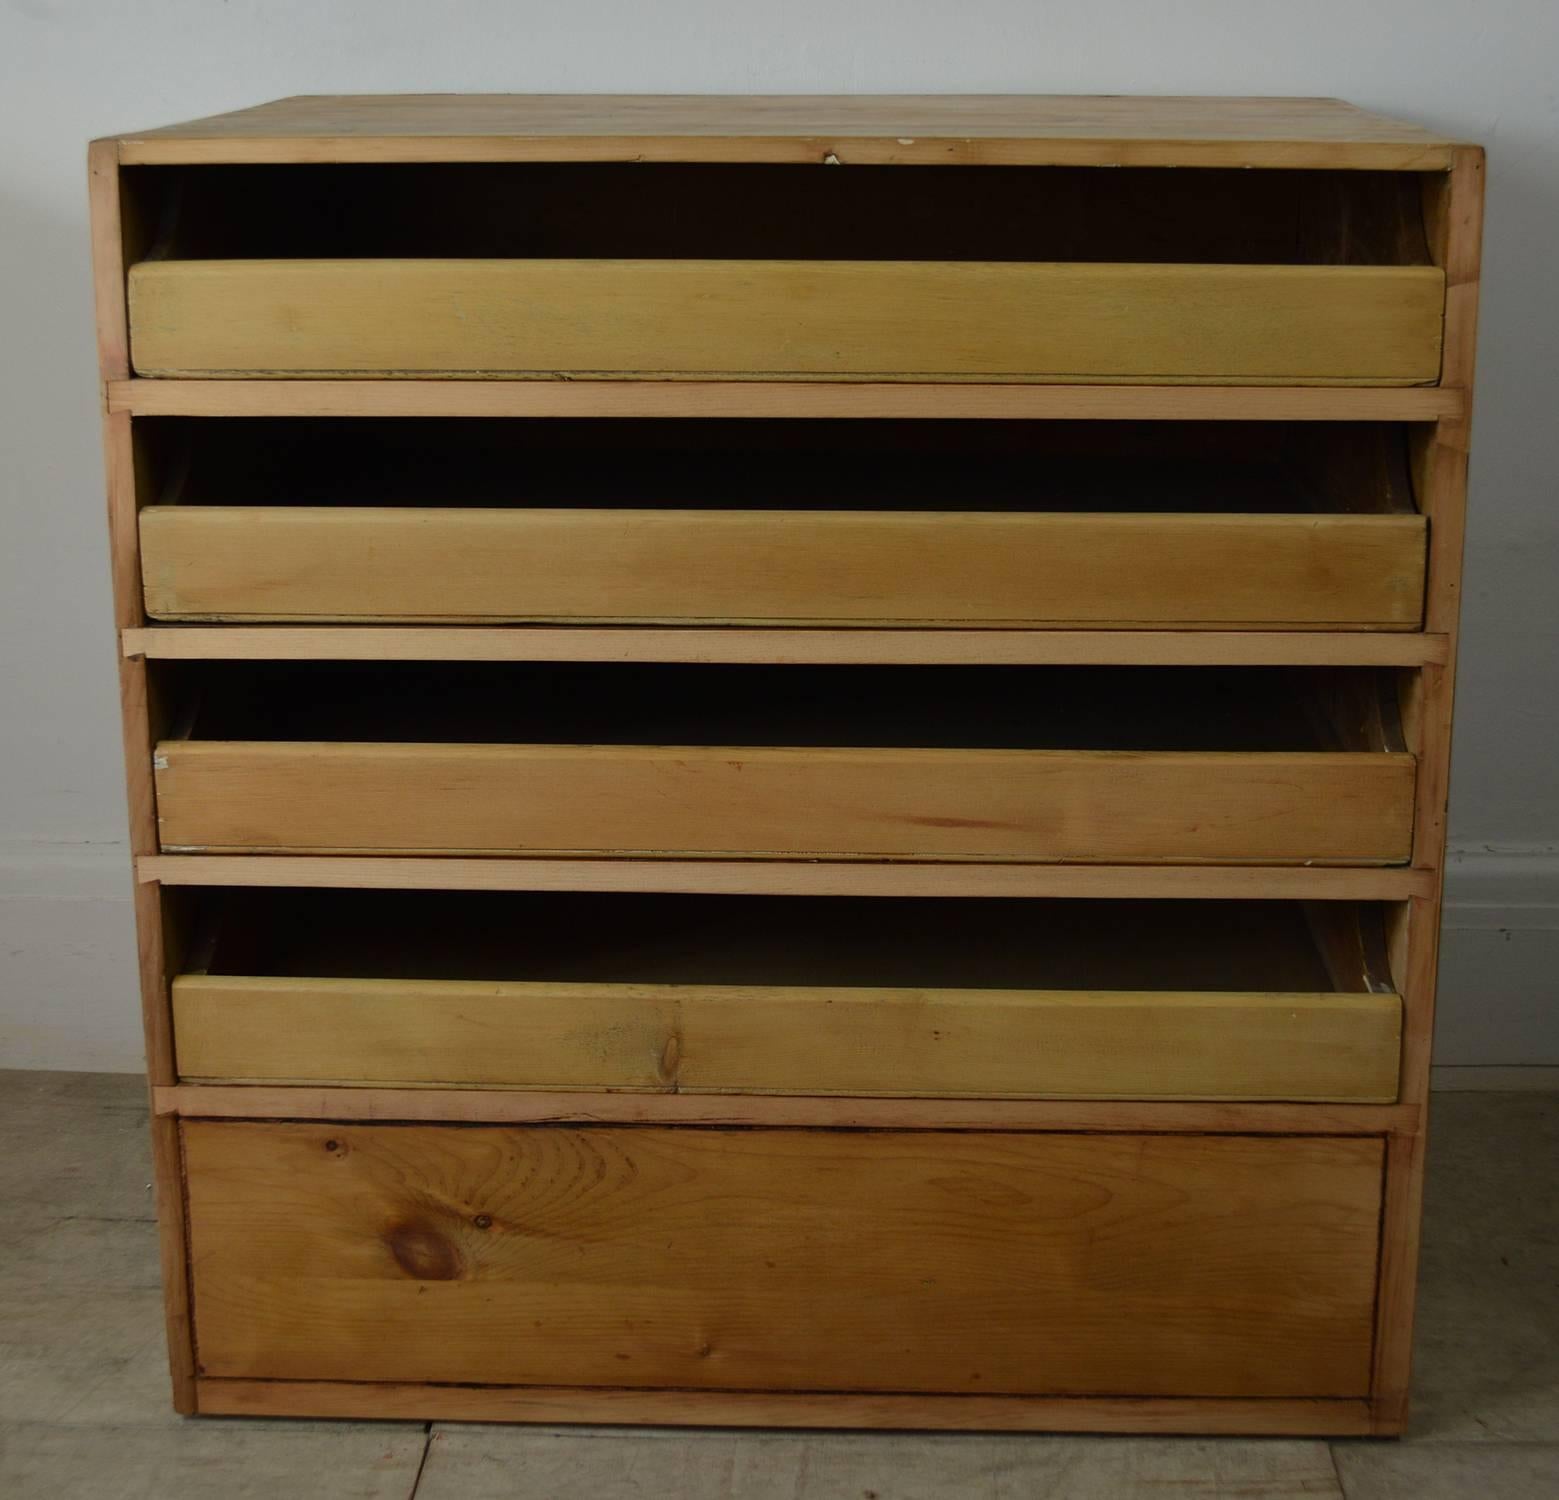 A splendid antique pine plan chest. It has four drawers for charts, folio prints, architectural drawings etc.

Solid pine drawer bottoms. Smooth running drawers.

The very bottom apparent drawer is a dummy drawer.

There have been some recent